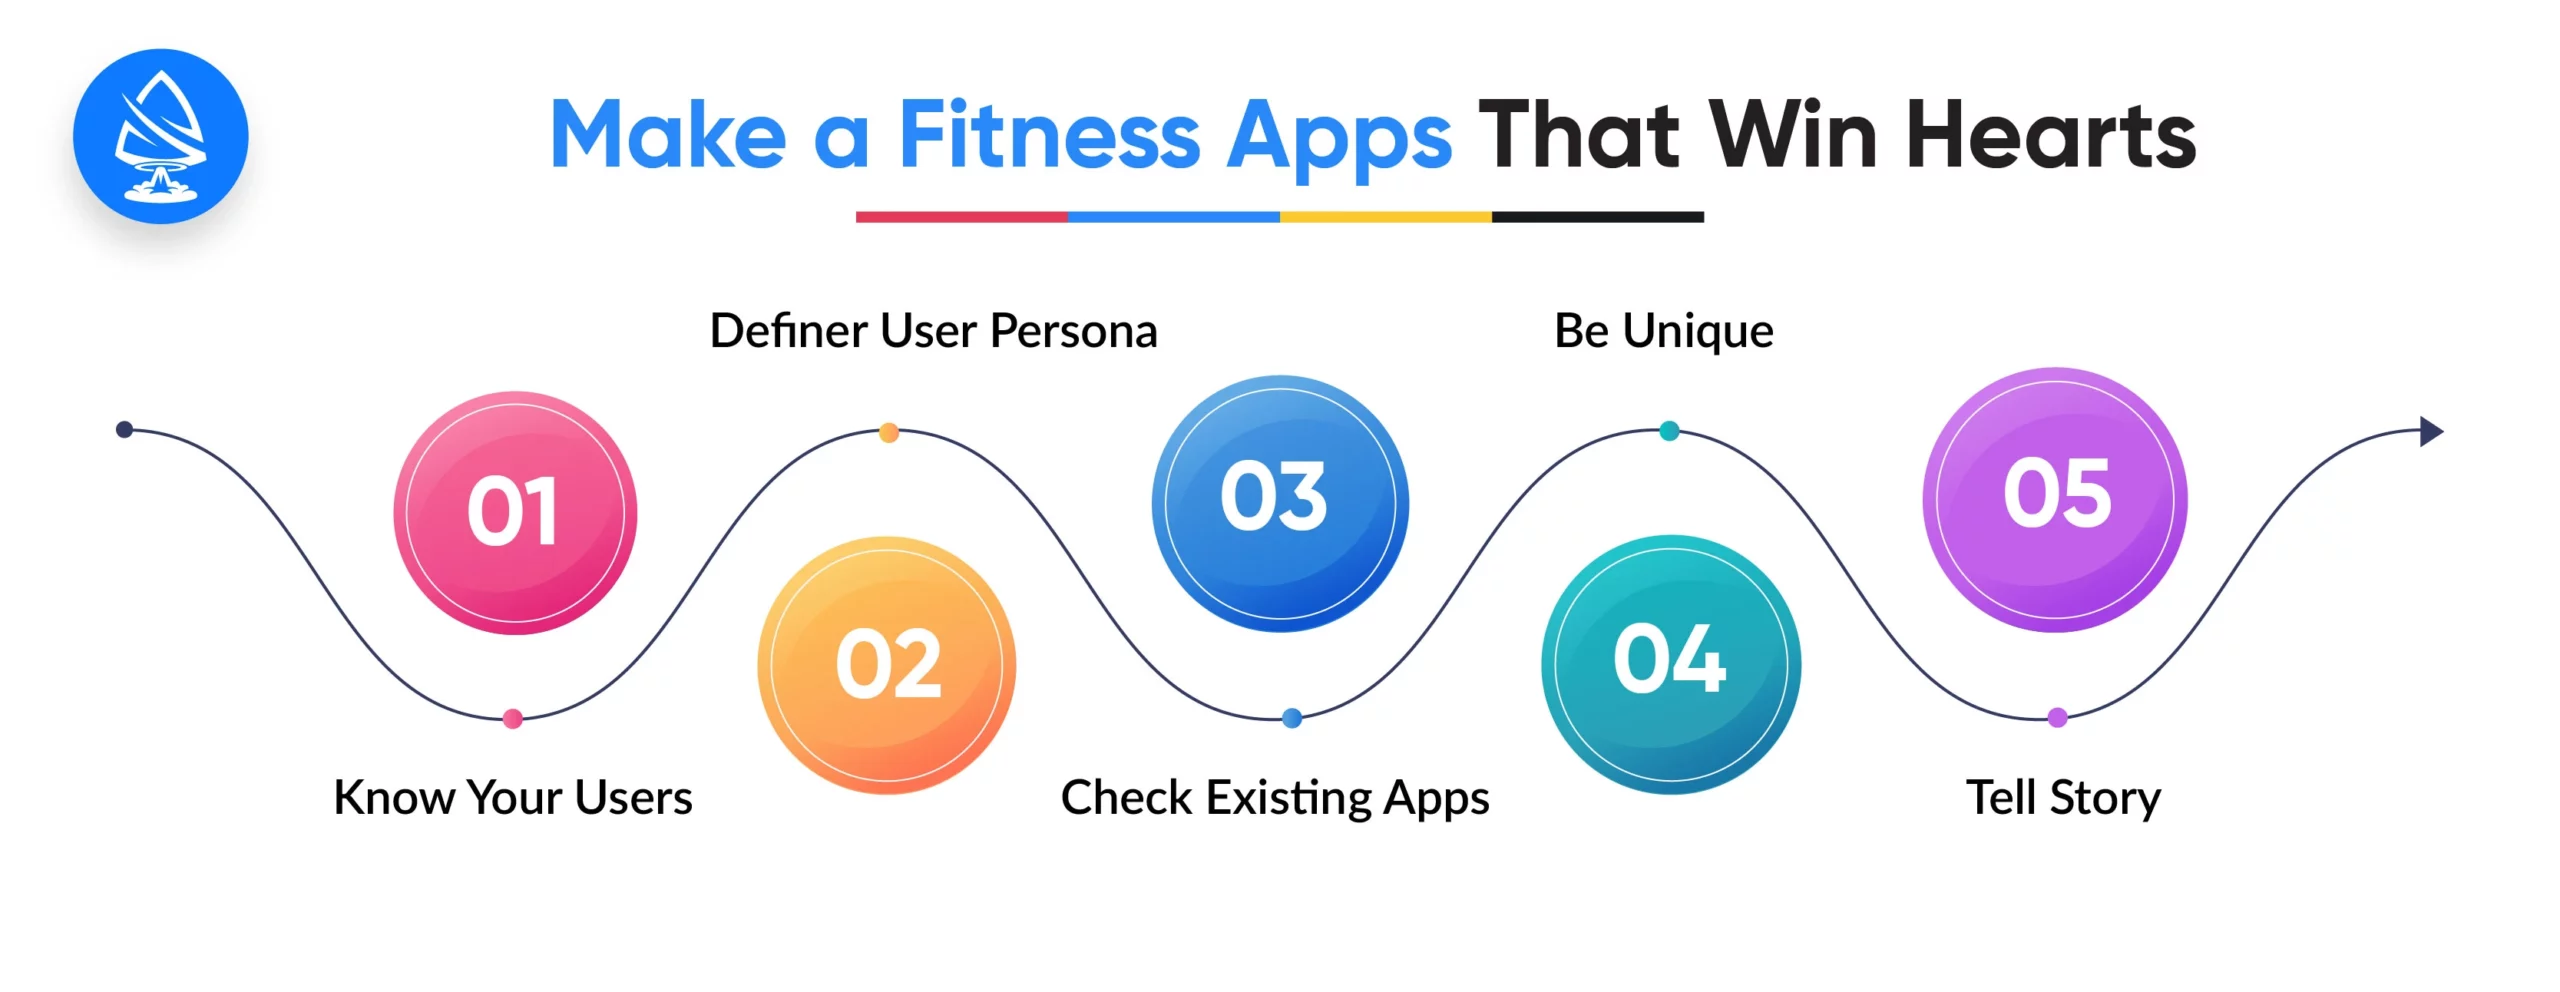 How to Make a Fitness App That Wins Hearts (and Conversions): Start with Your Audience